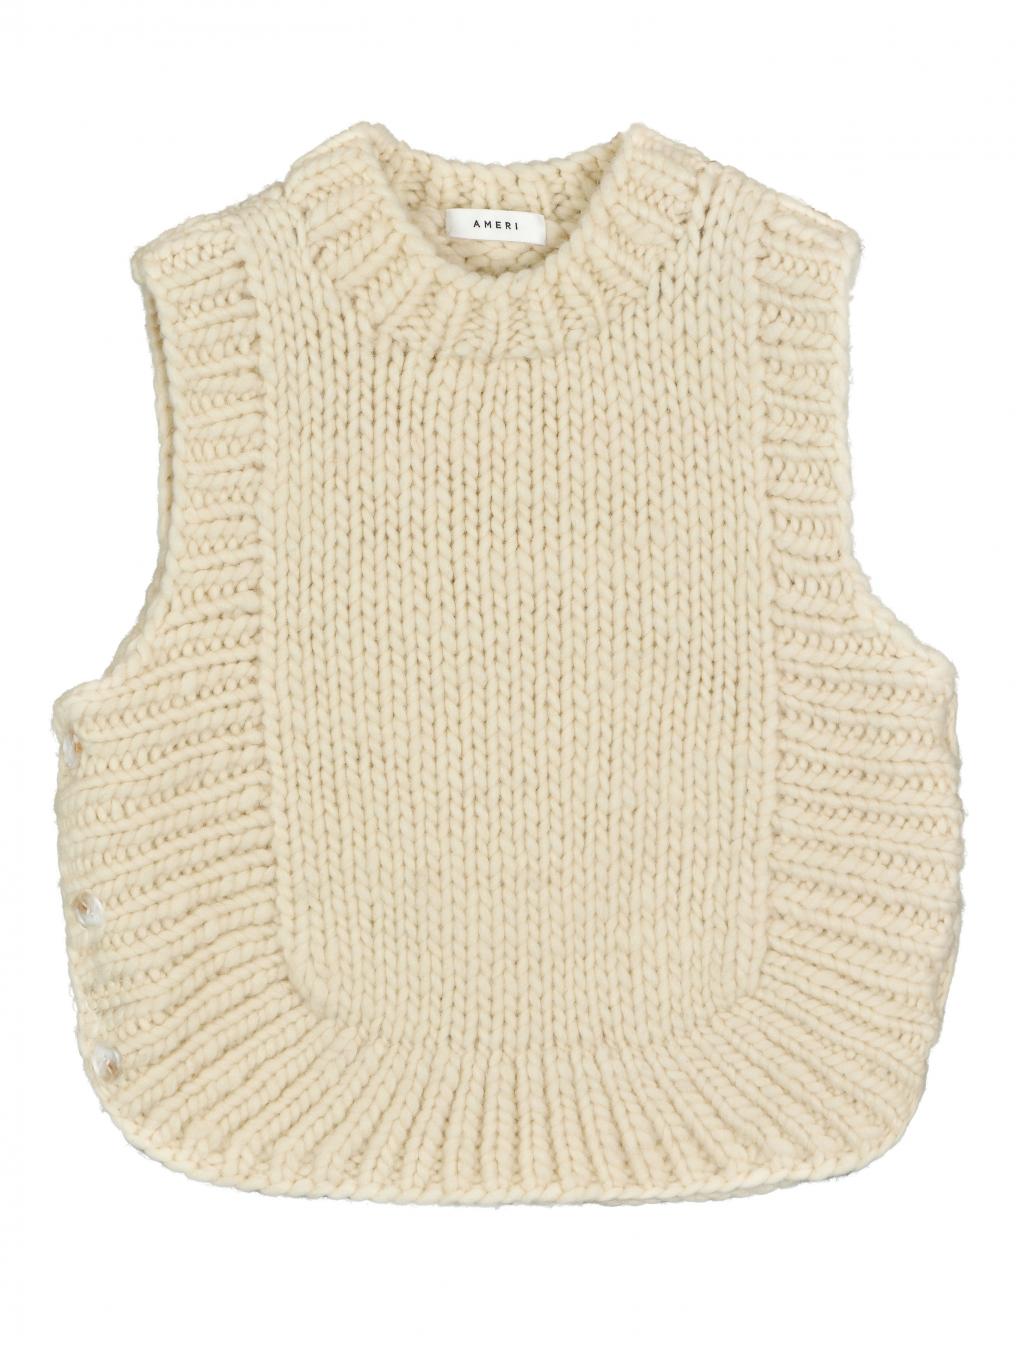 2WAY SHIRRING KNIT VEST アメリヴィンテージ